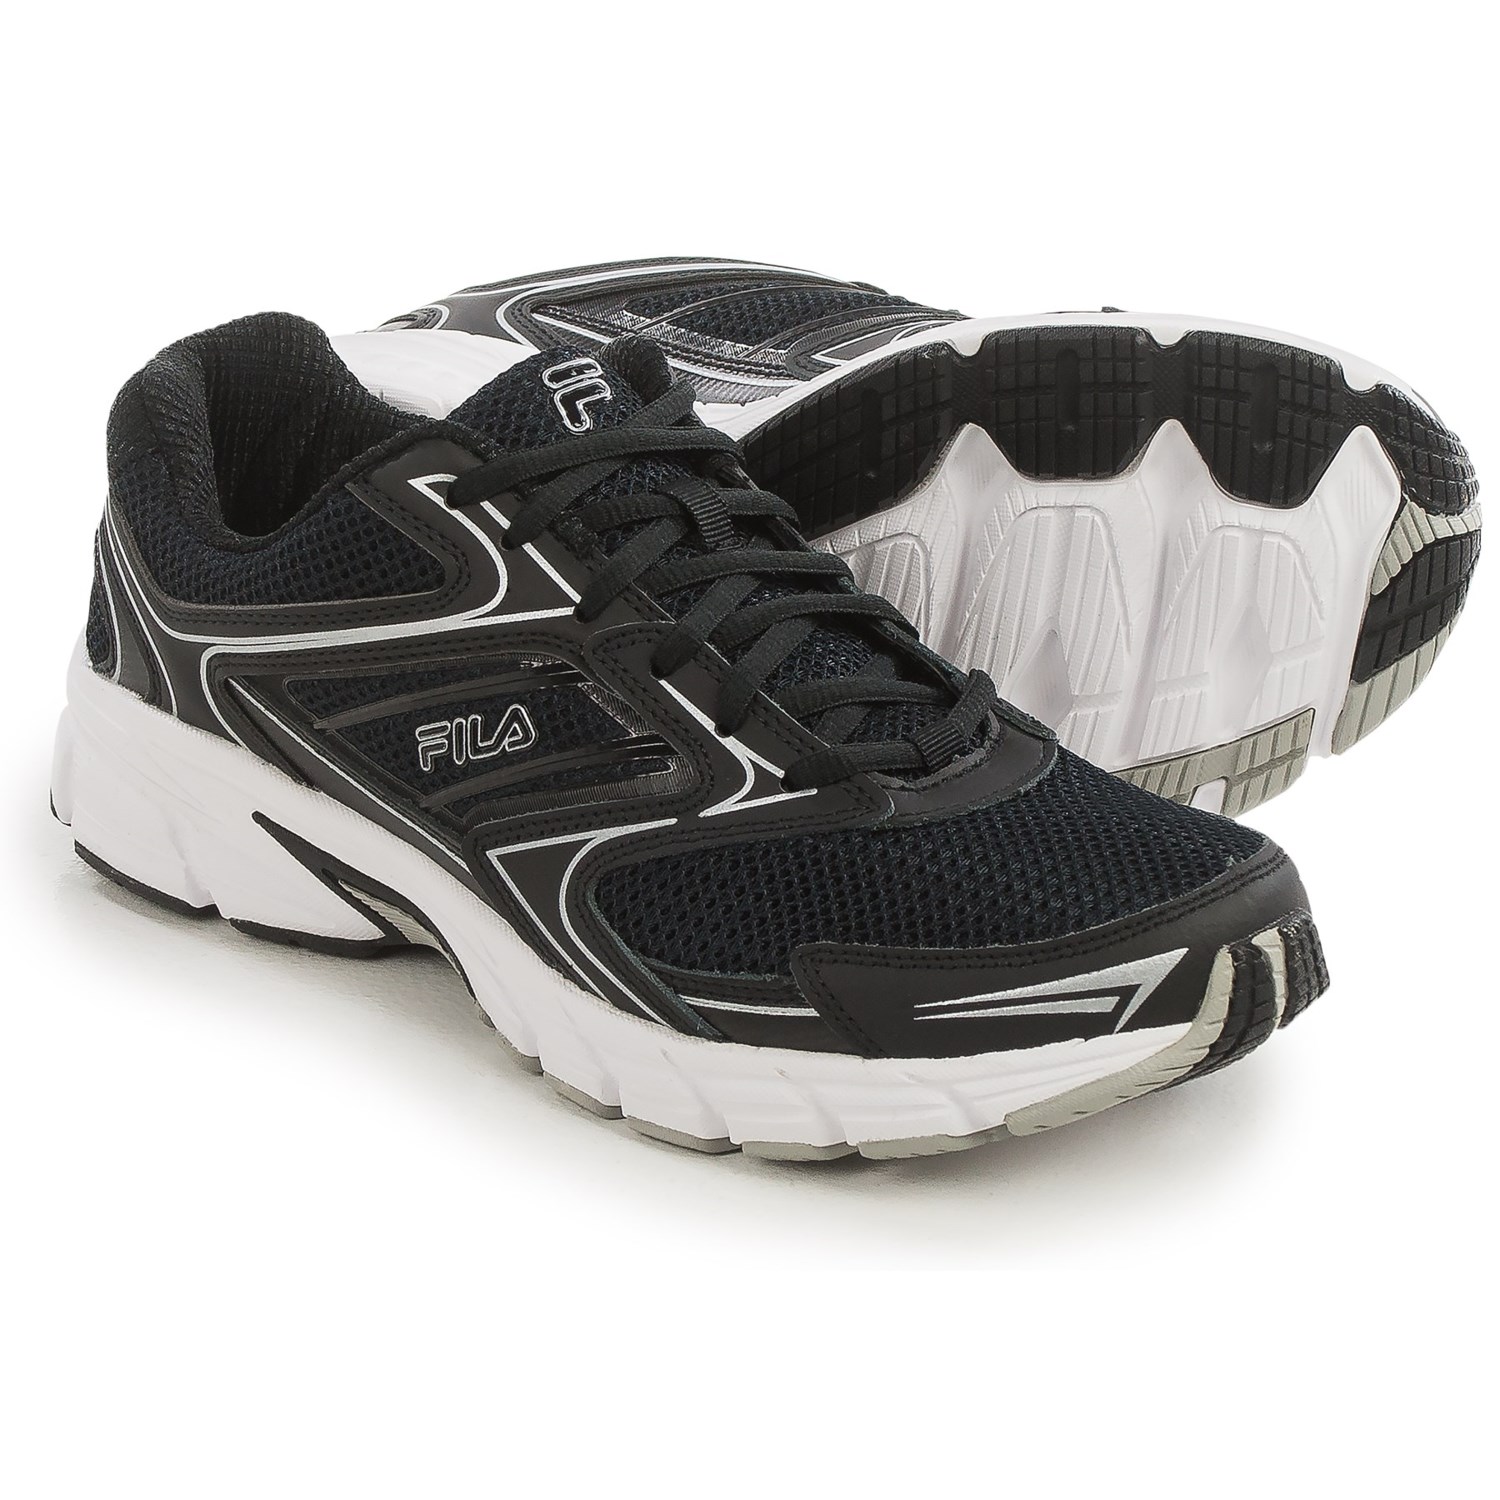 Fila Xtent 4 Running Shoes (For Men) - Save 57%